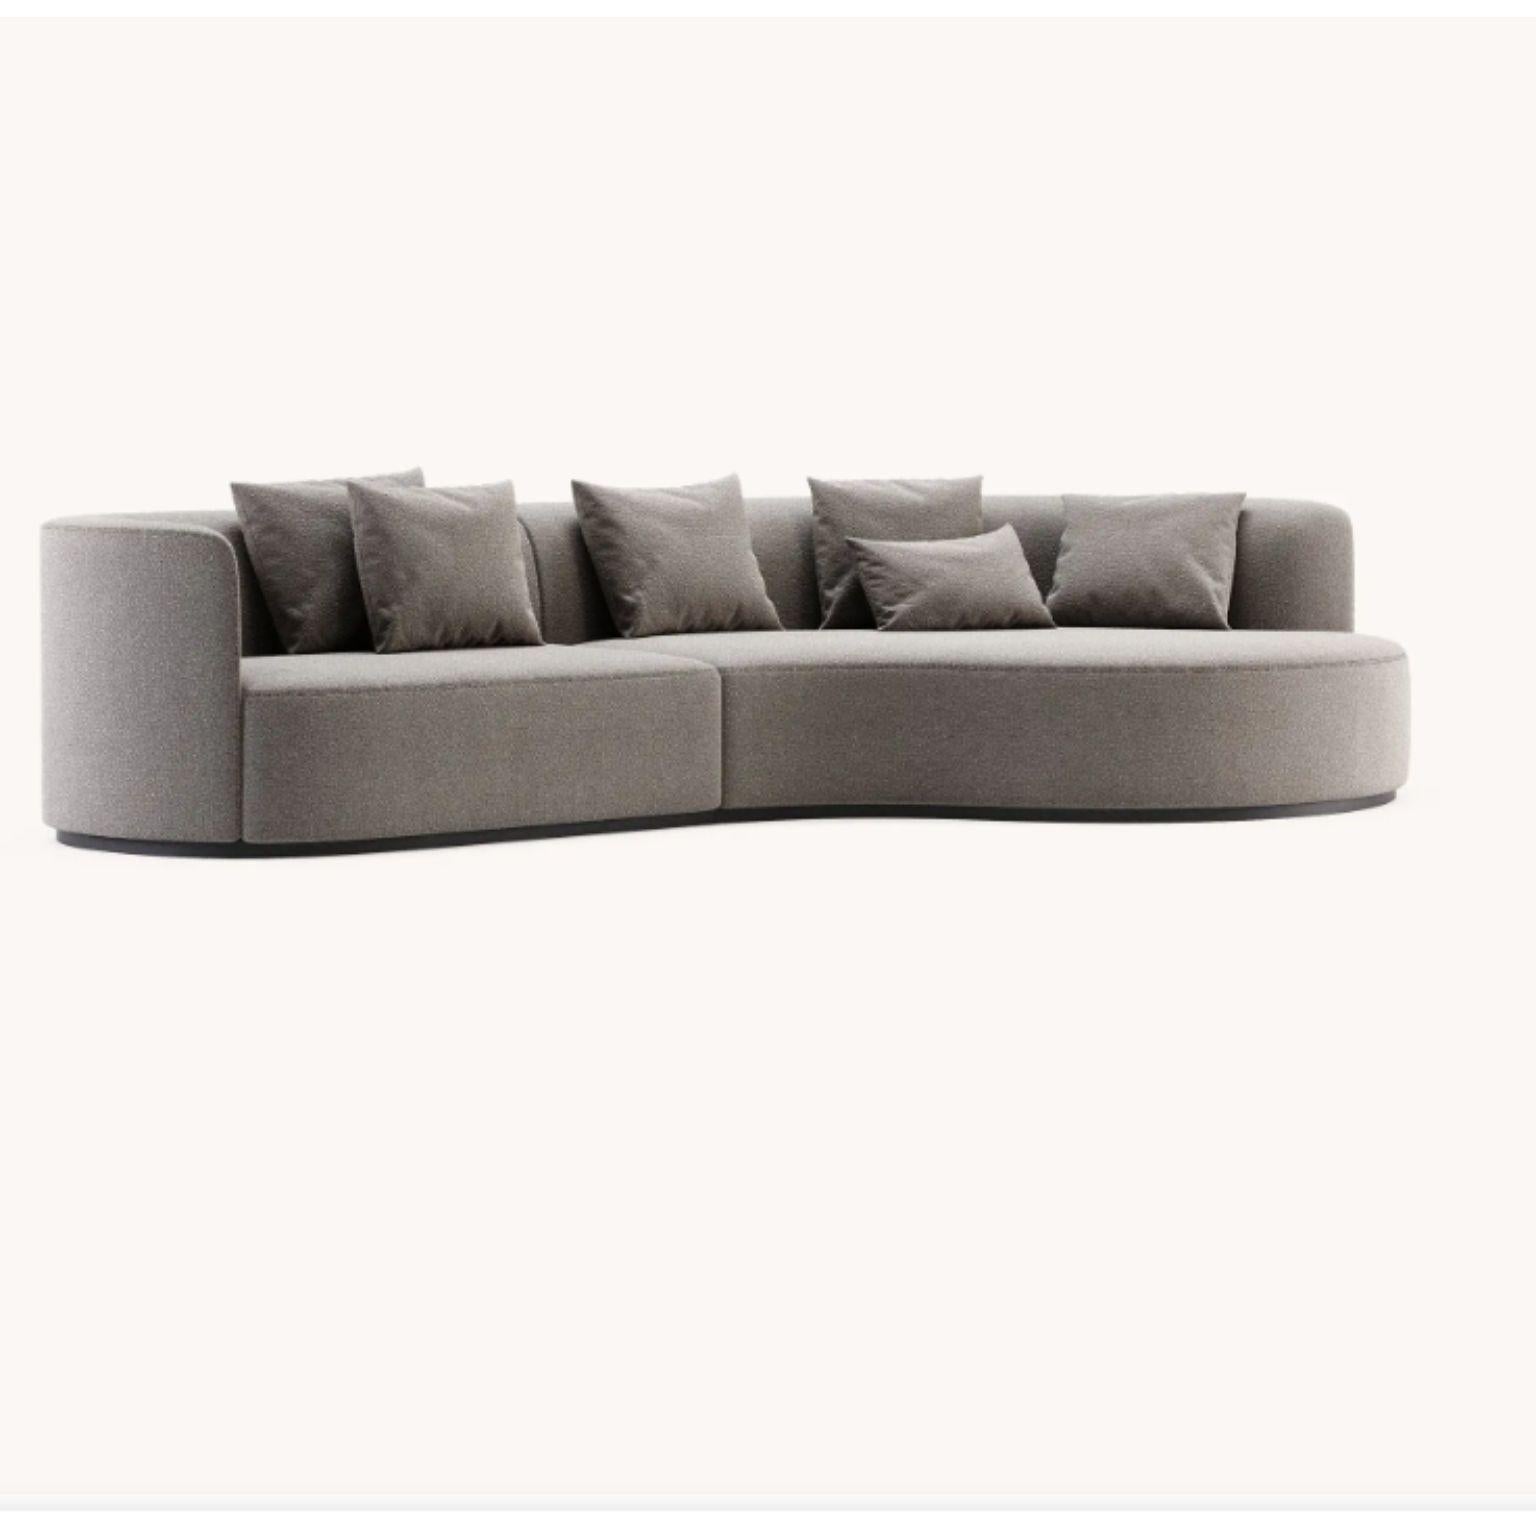 Chloe chaise sofa by Domkapa
Materials: Bouclé (Columbia Taupe), black ash. 
Dimensions: W 350 x D 180 x H 75.5 cm.
Also available in different materials. Please contact us.

Chloe is an outstanding design piece with striking aesthetic balance